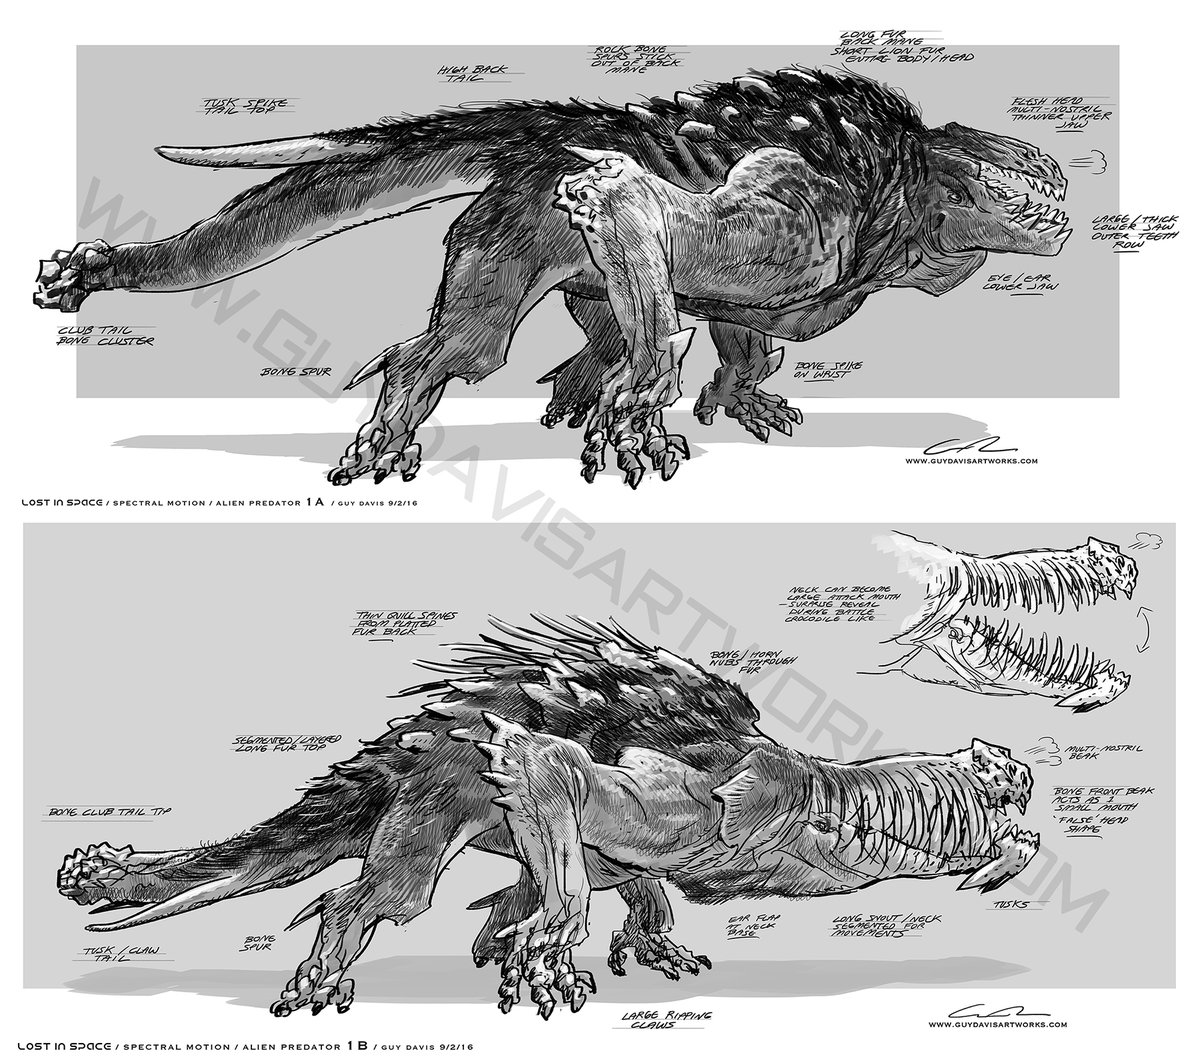 'Danger, Will Robinson!' some 2016 alien wildlife concepts for Spectral Motion on the LOST IN SPACE reboot #ThrowbackThursday #creatureconcept